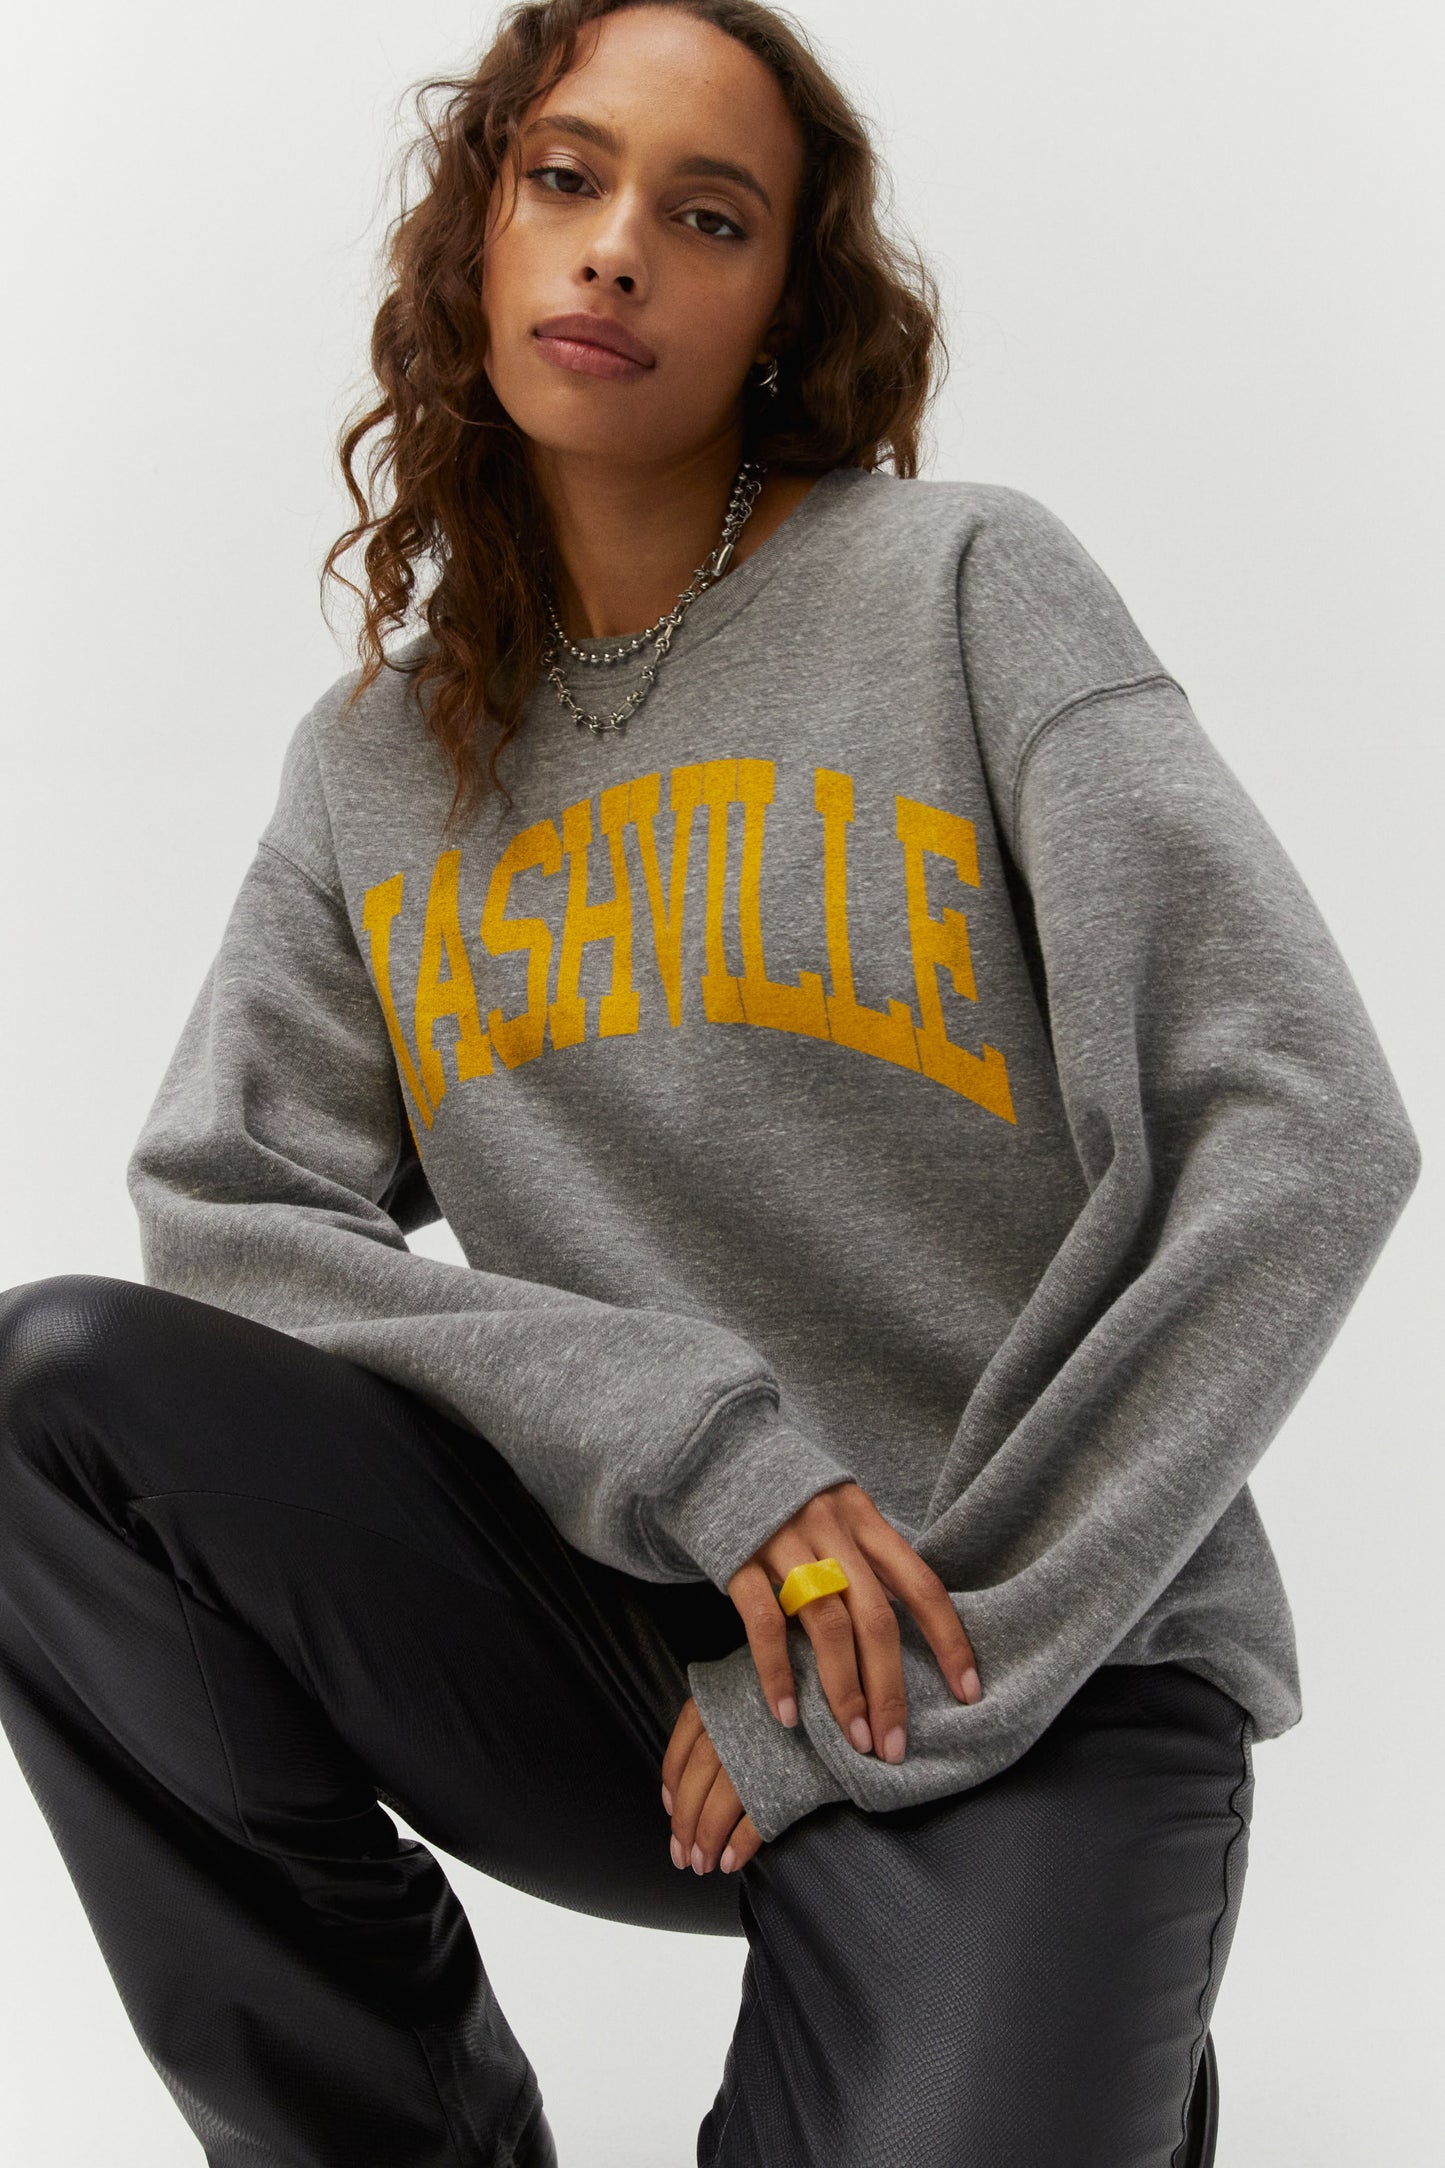 Brown curly-haired model featuring a gray crew designed with ‘Nashville’ in collegiate style letters